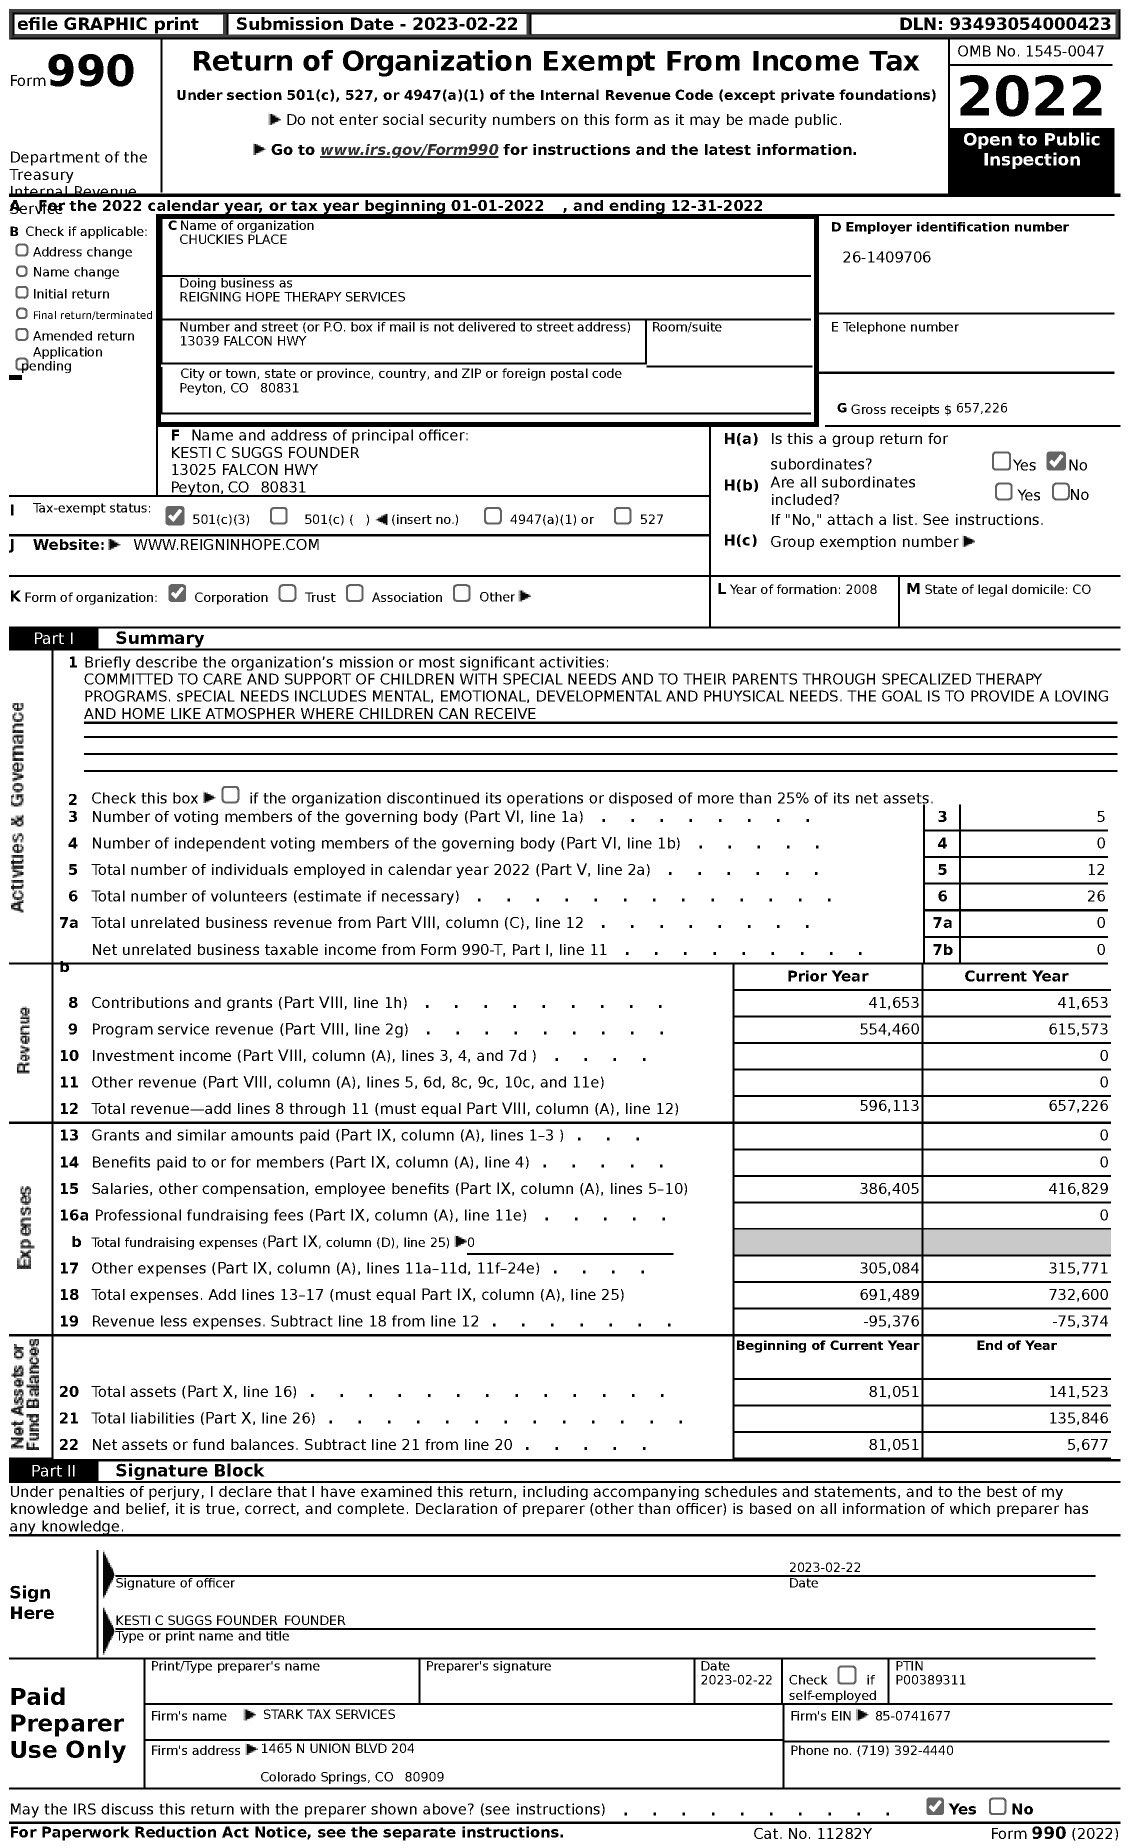 Image of first page of 2022 Form 990 for Reigning Hope Therapy Services